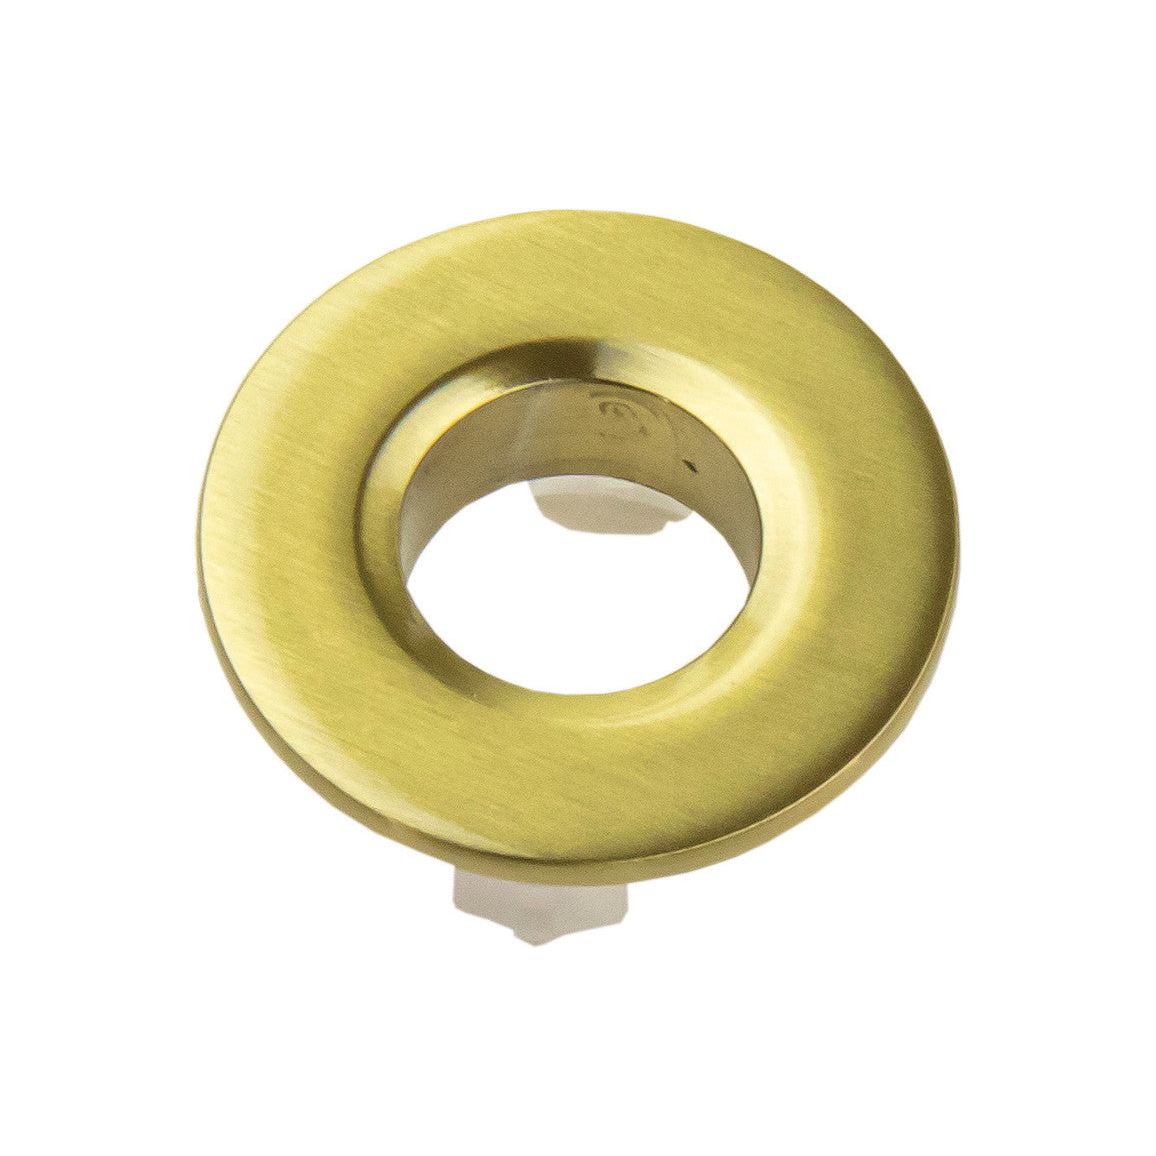 Overflow Ring - Brushed Brass